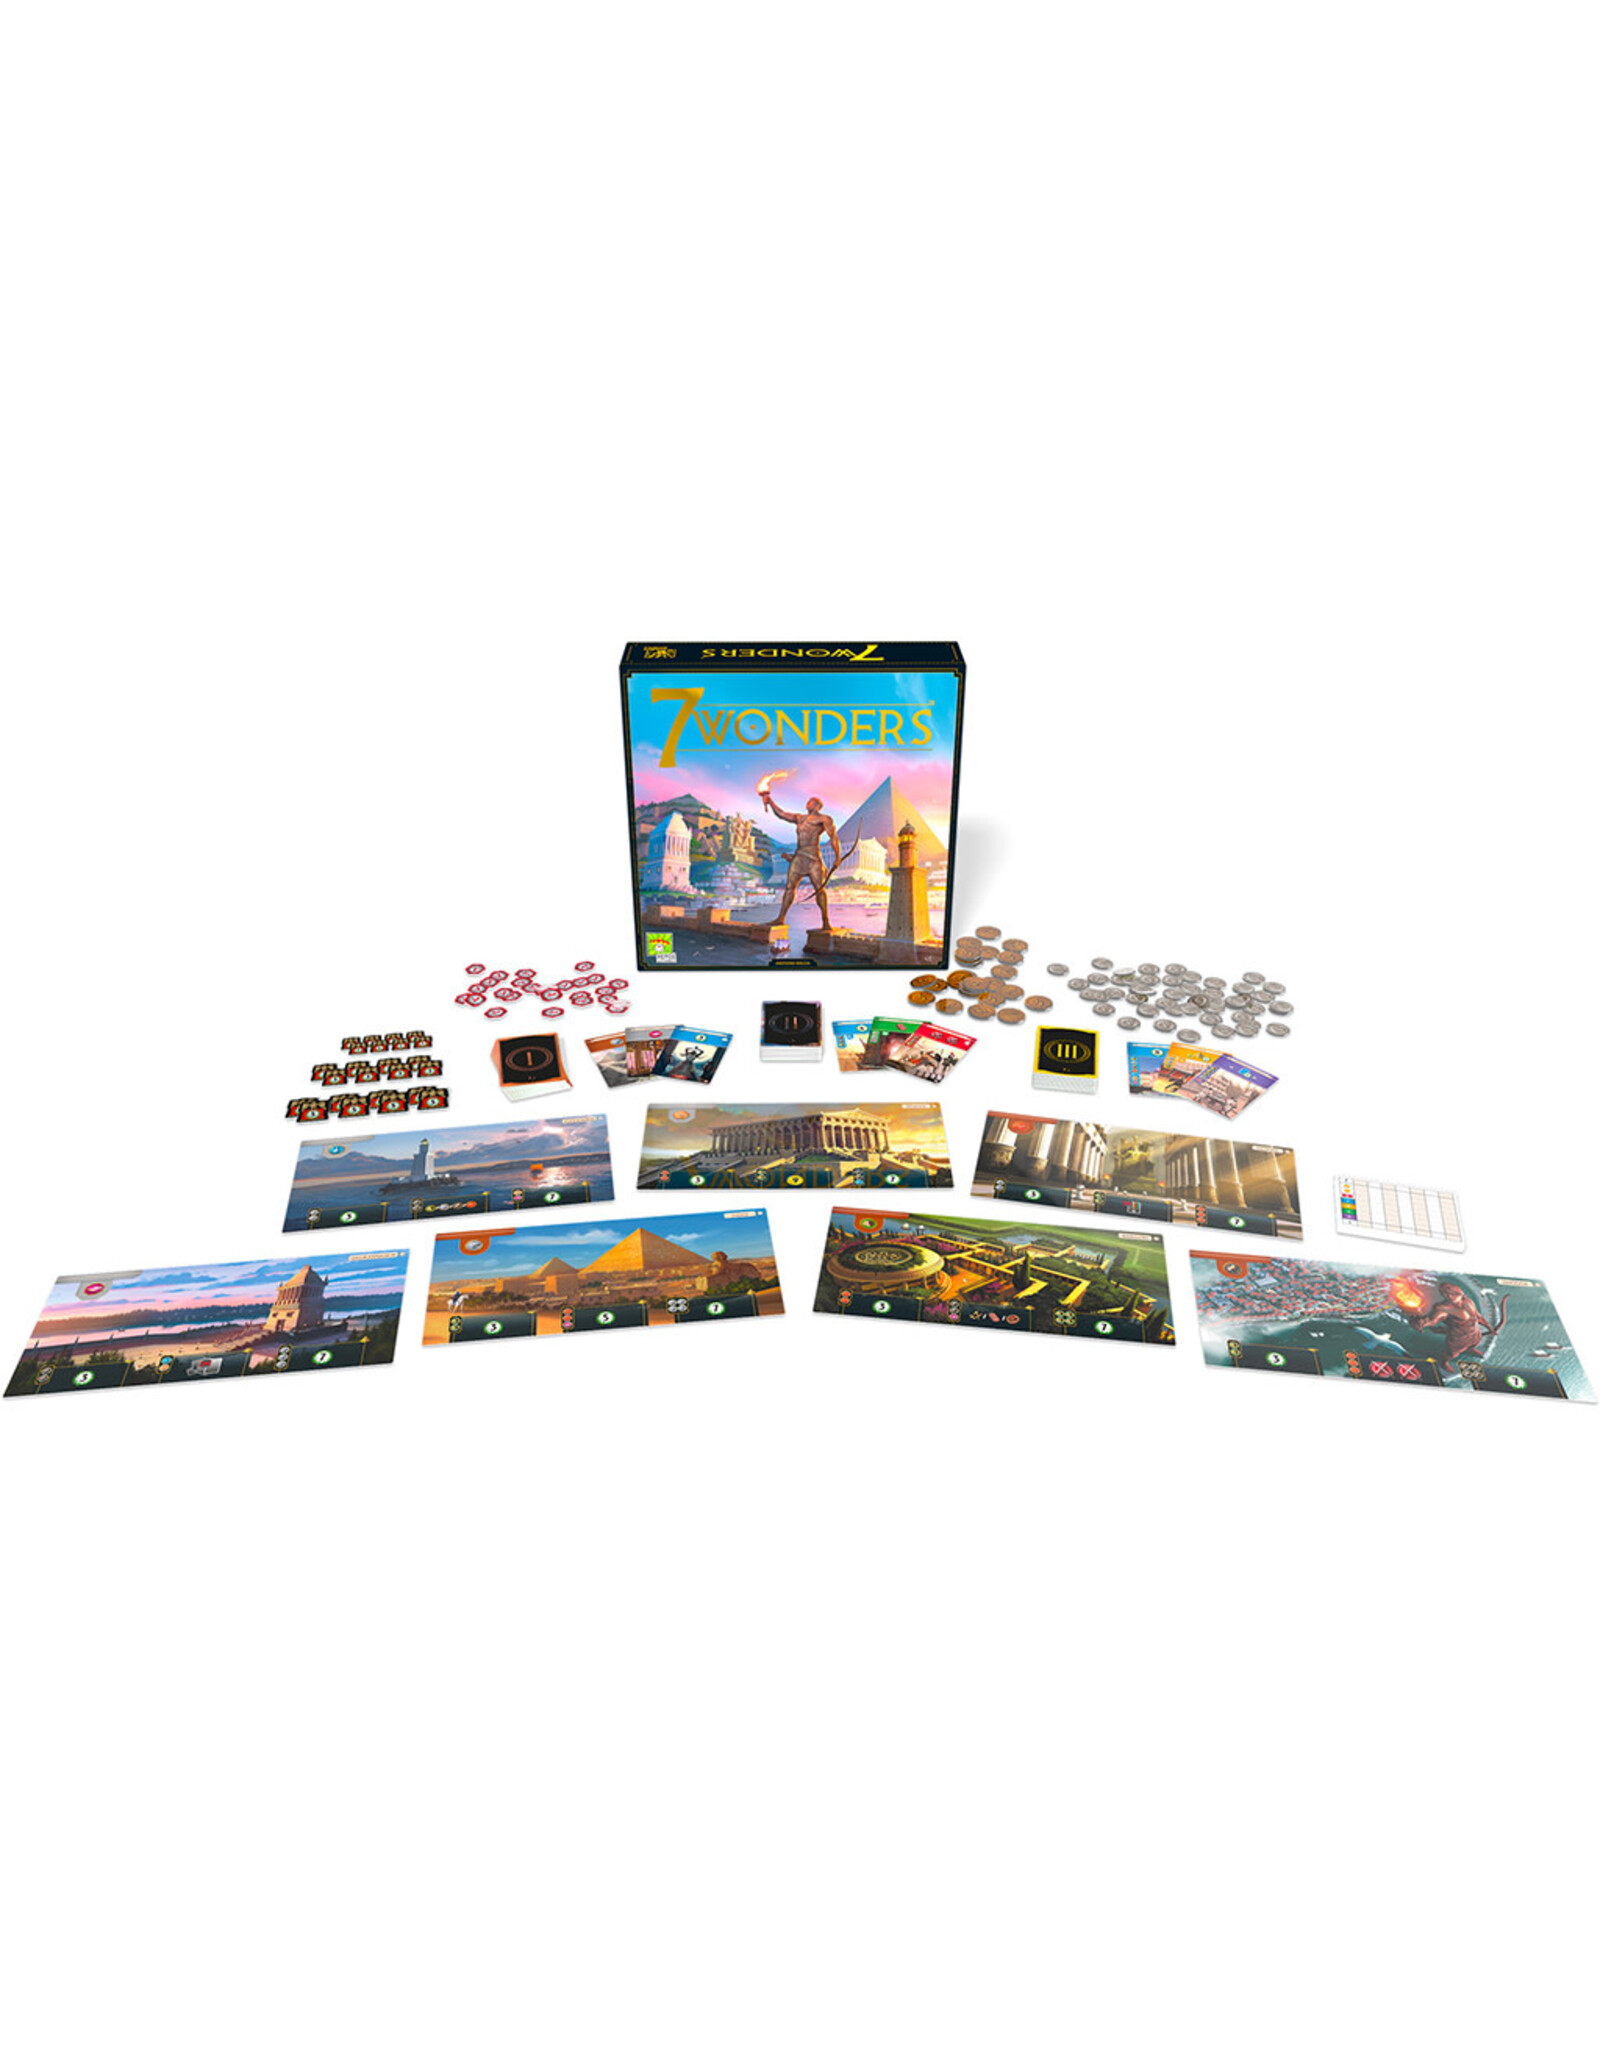 Repos Production 7 Wonders - New Edition